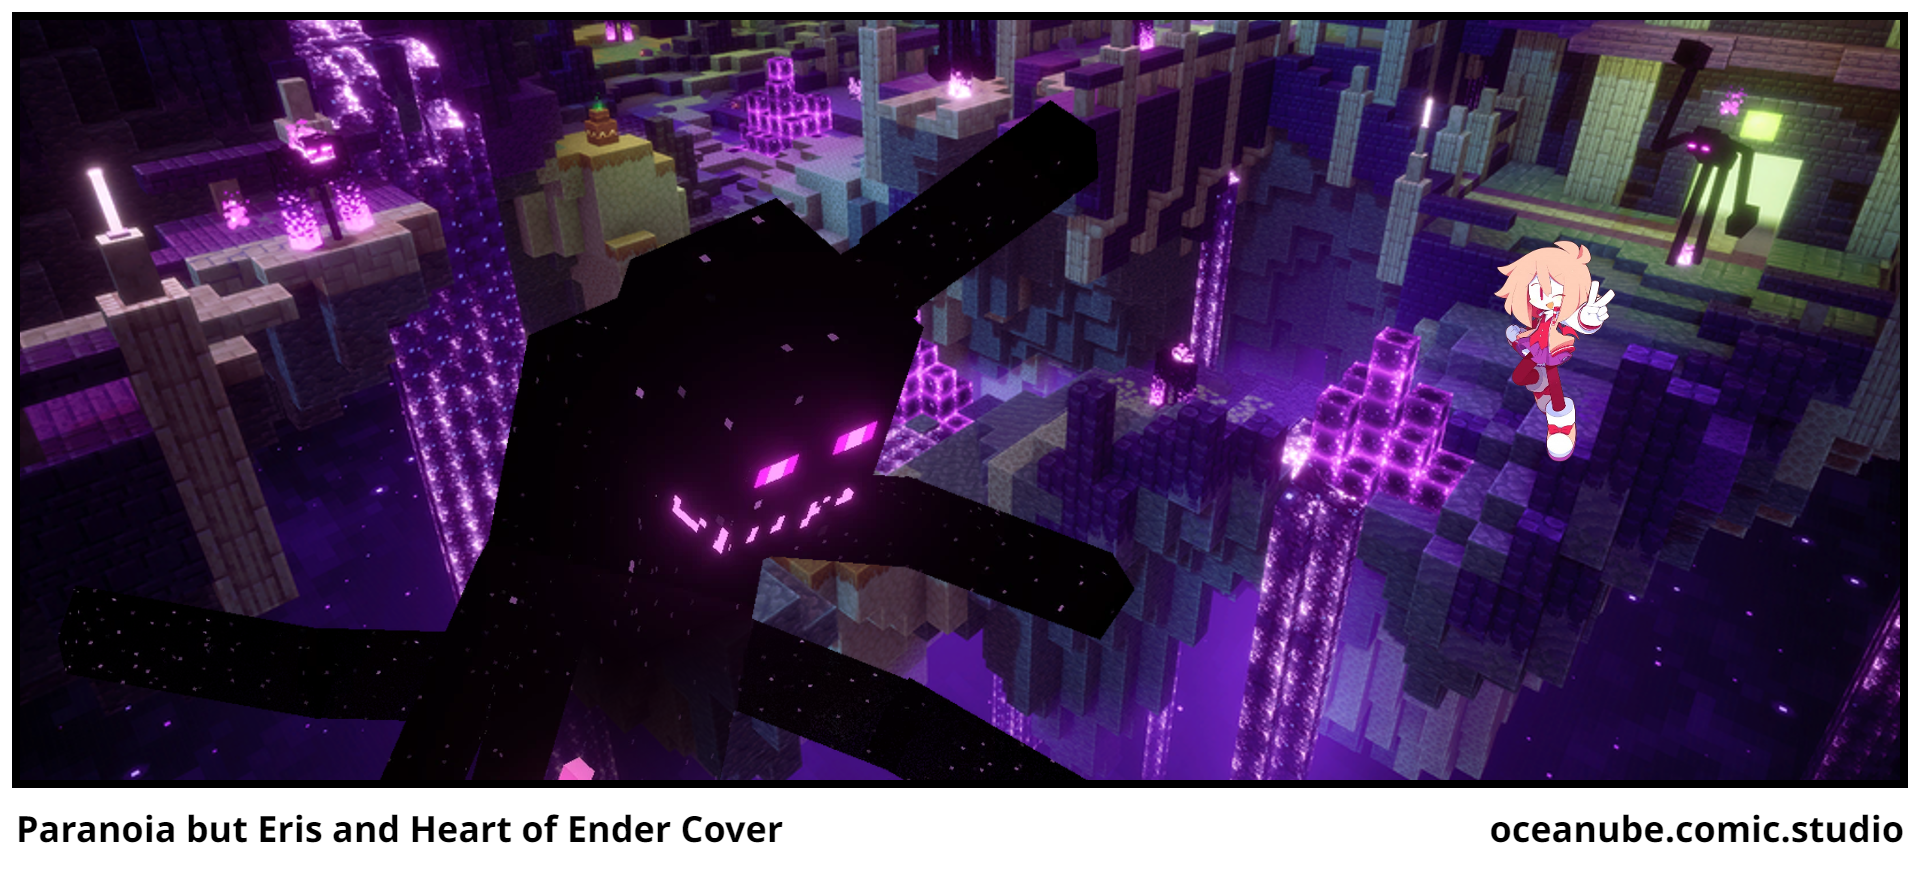 Paranoia but Eris and Heart of Ender Cover